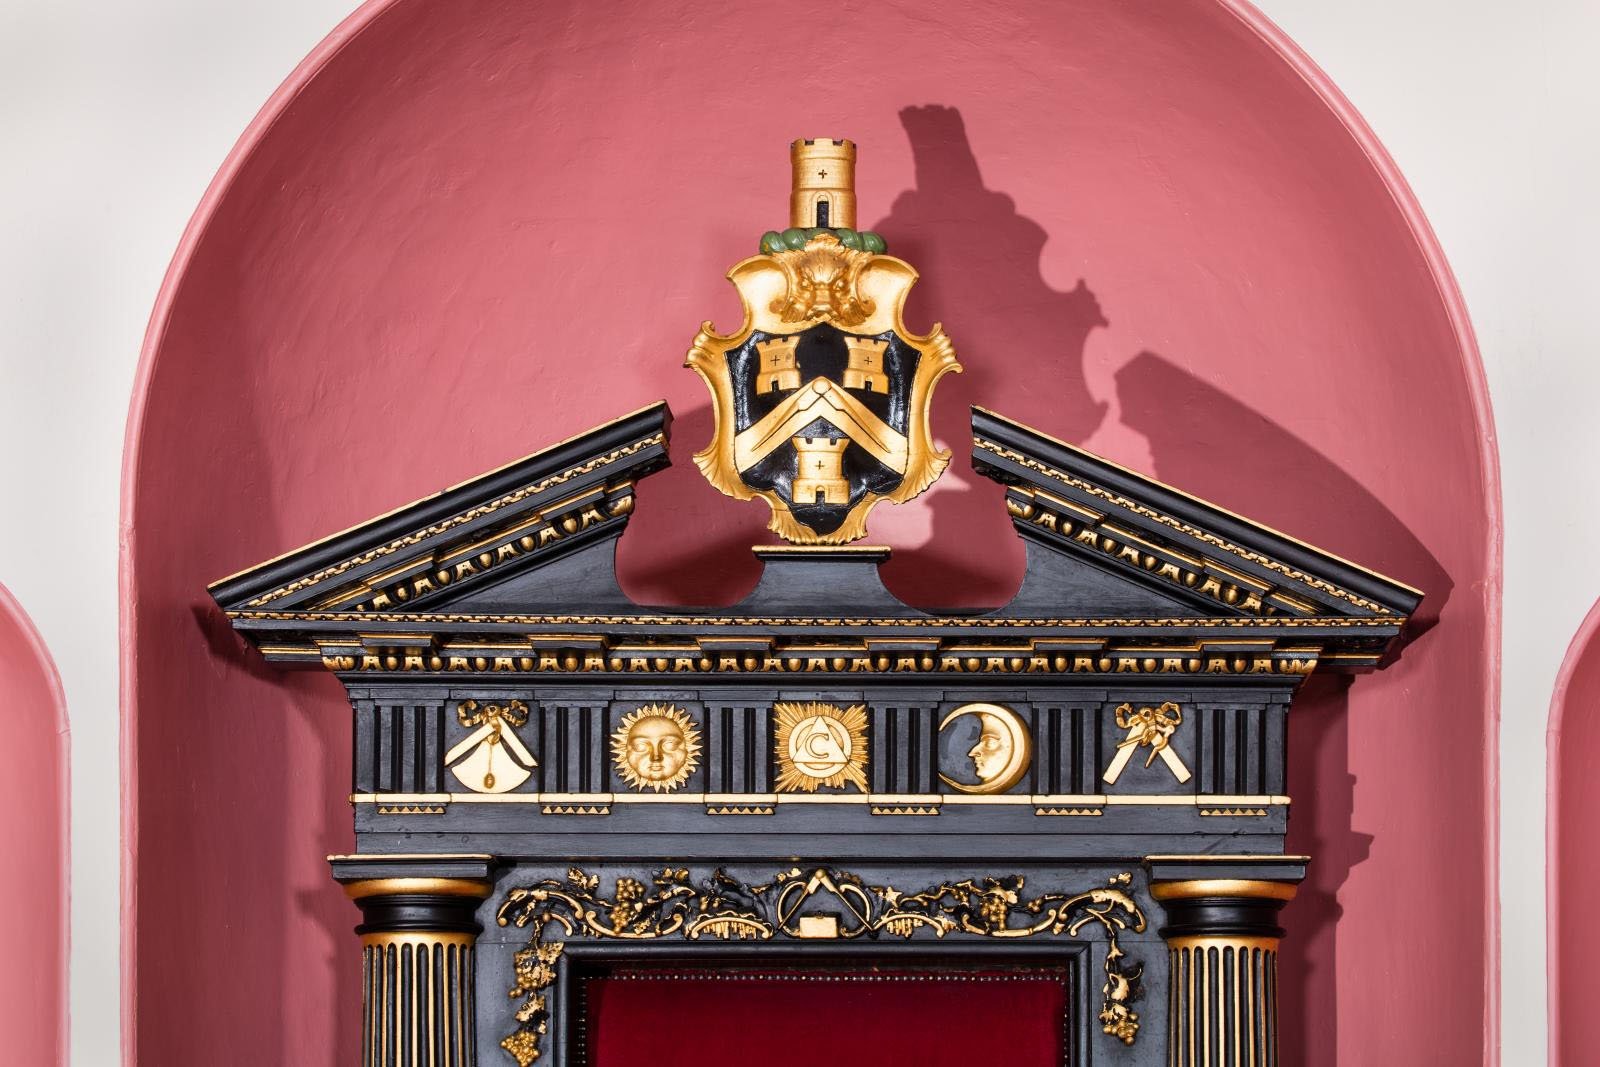 Coat of arms on top of a throne with masonic symbols underneath. Wood is black with gold leaf decoration.